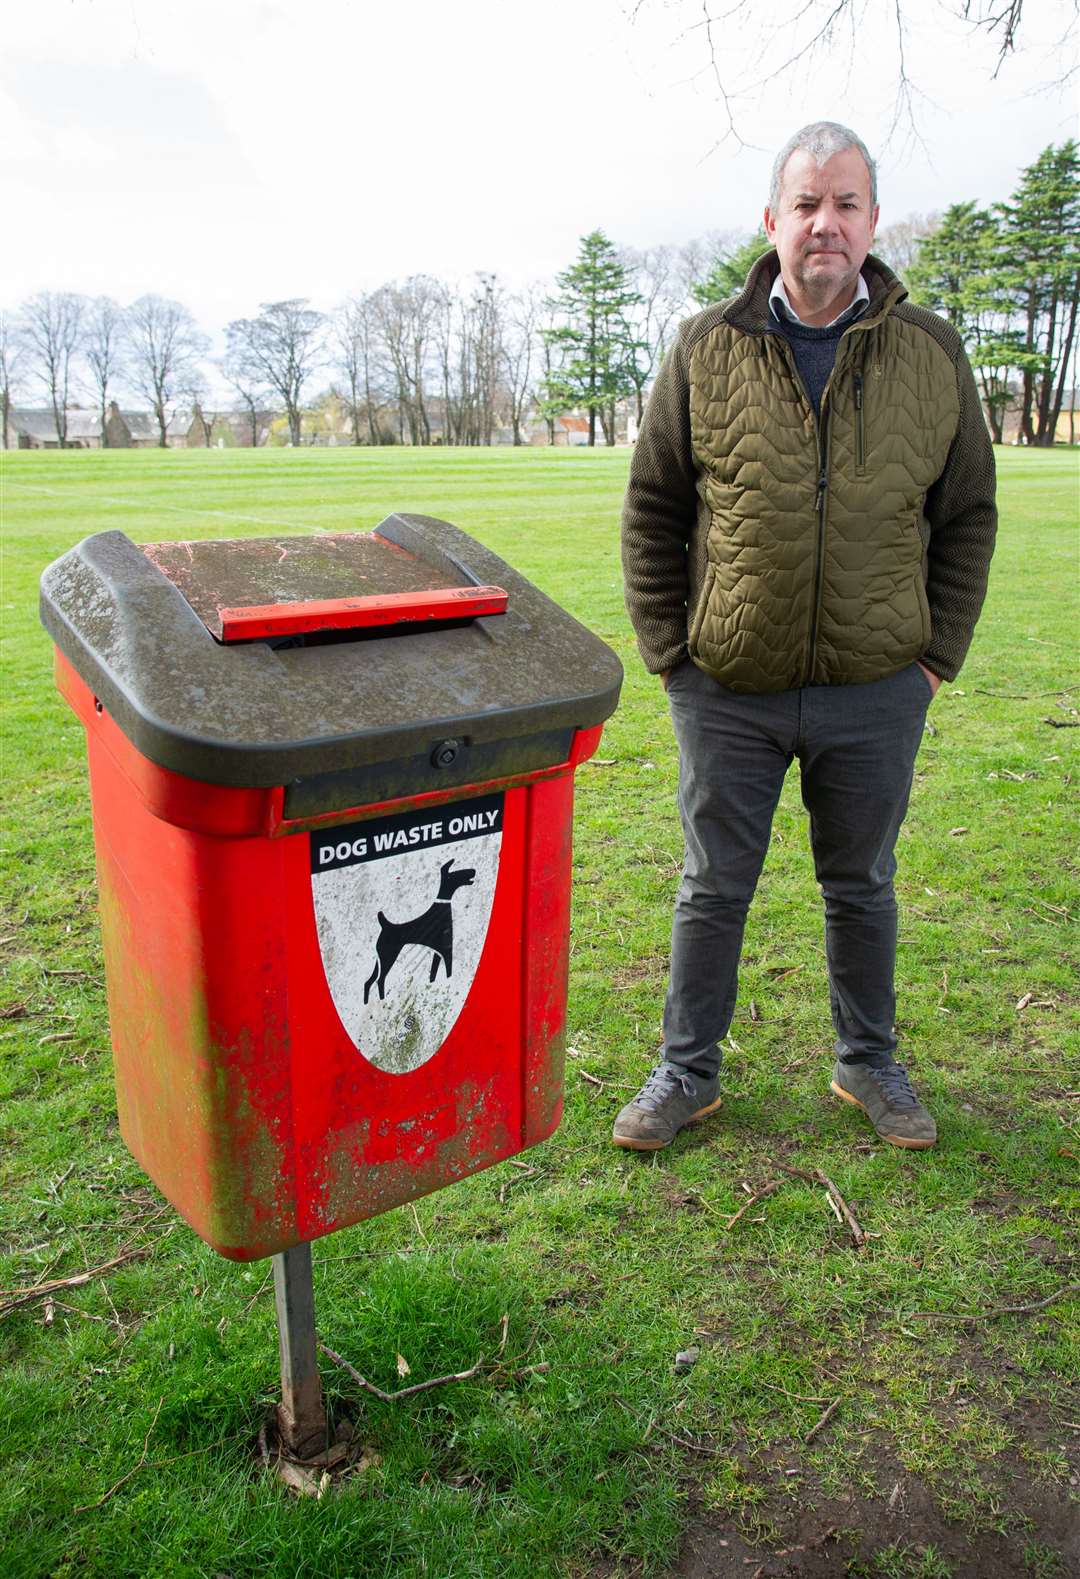 Forres Community Councillor John Byrne is also calling for more dog bins to be installed to help reduce the mess left in public spaces.